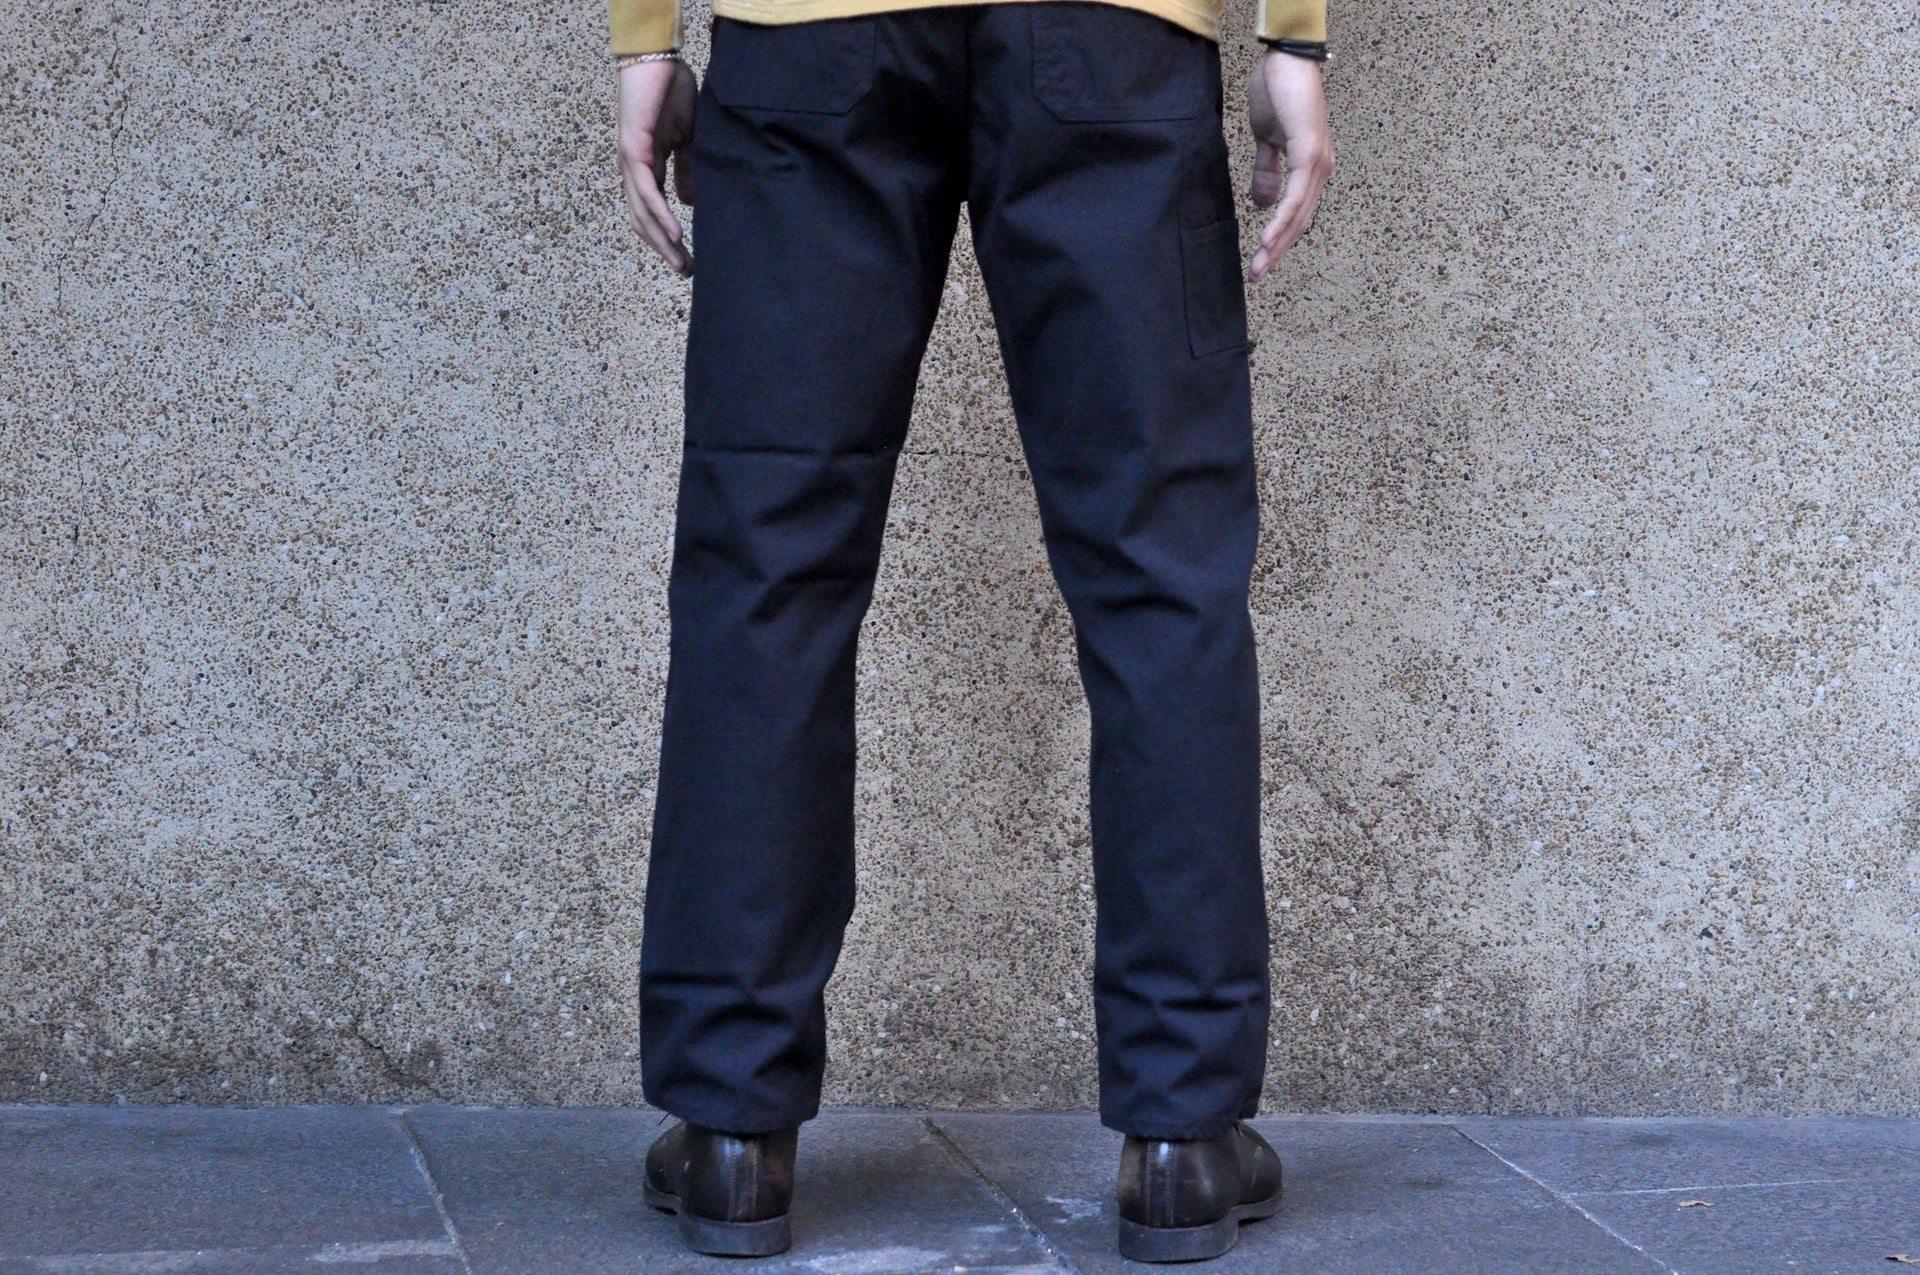 The Flat Head 11oz Duck Canvas Worker Pants (Straight Tapered fit)